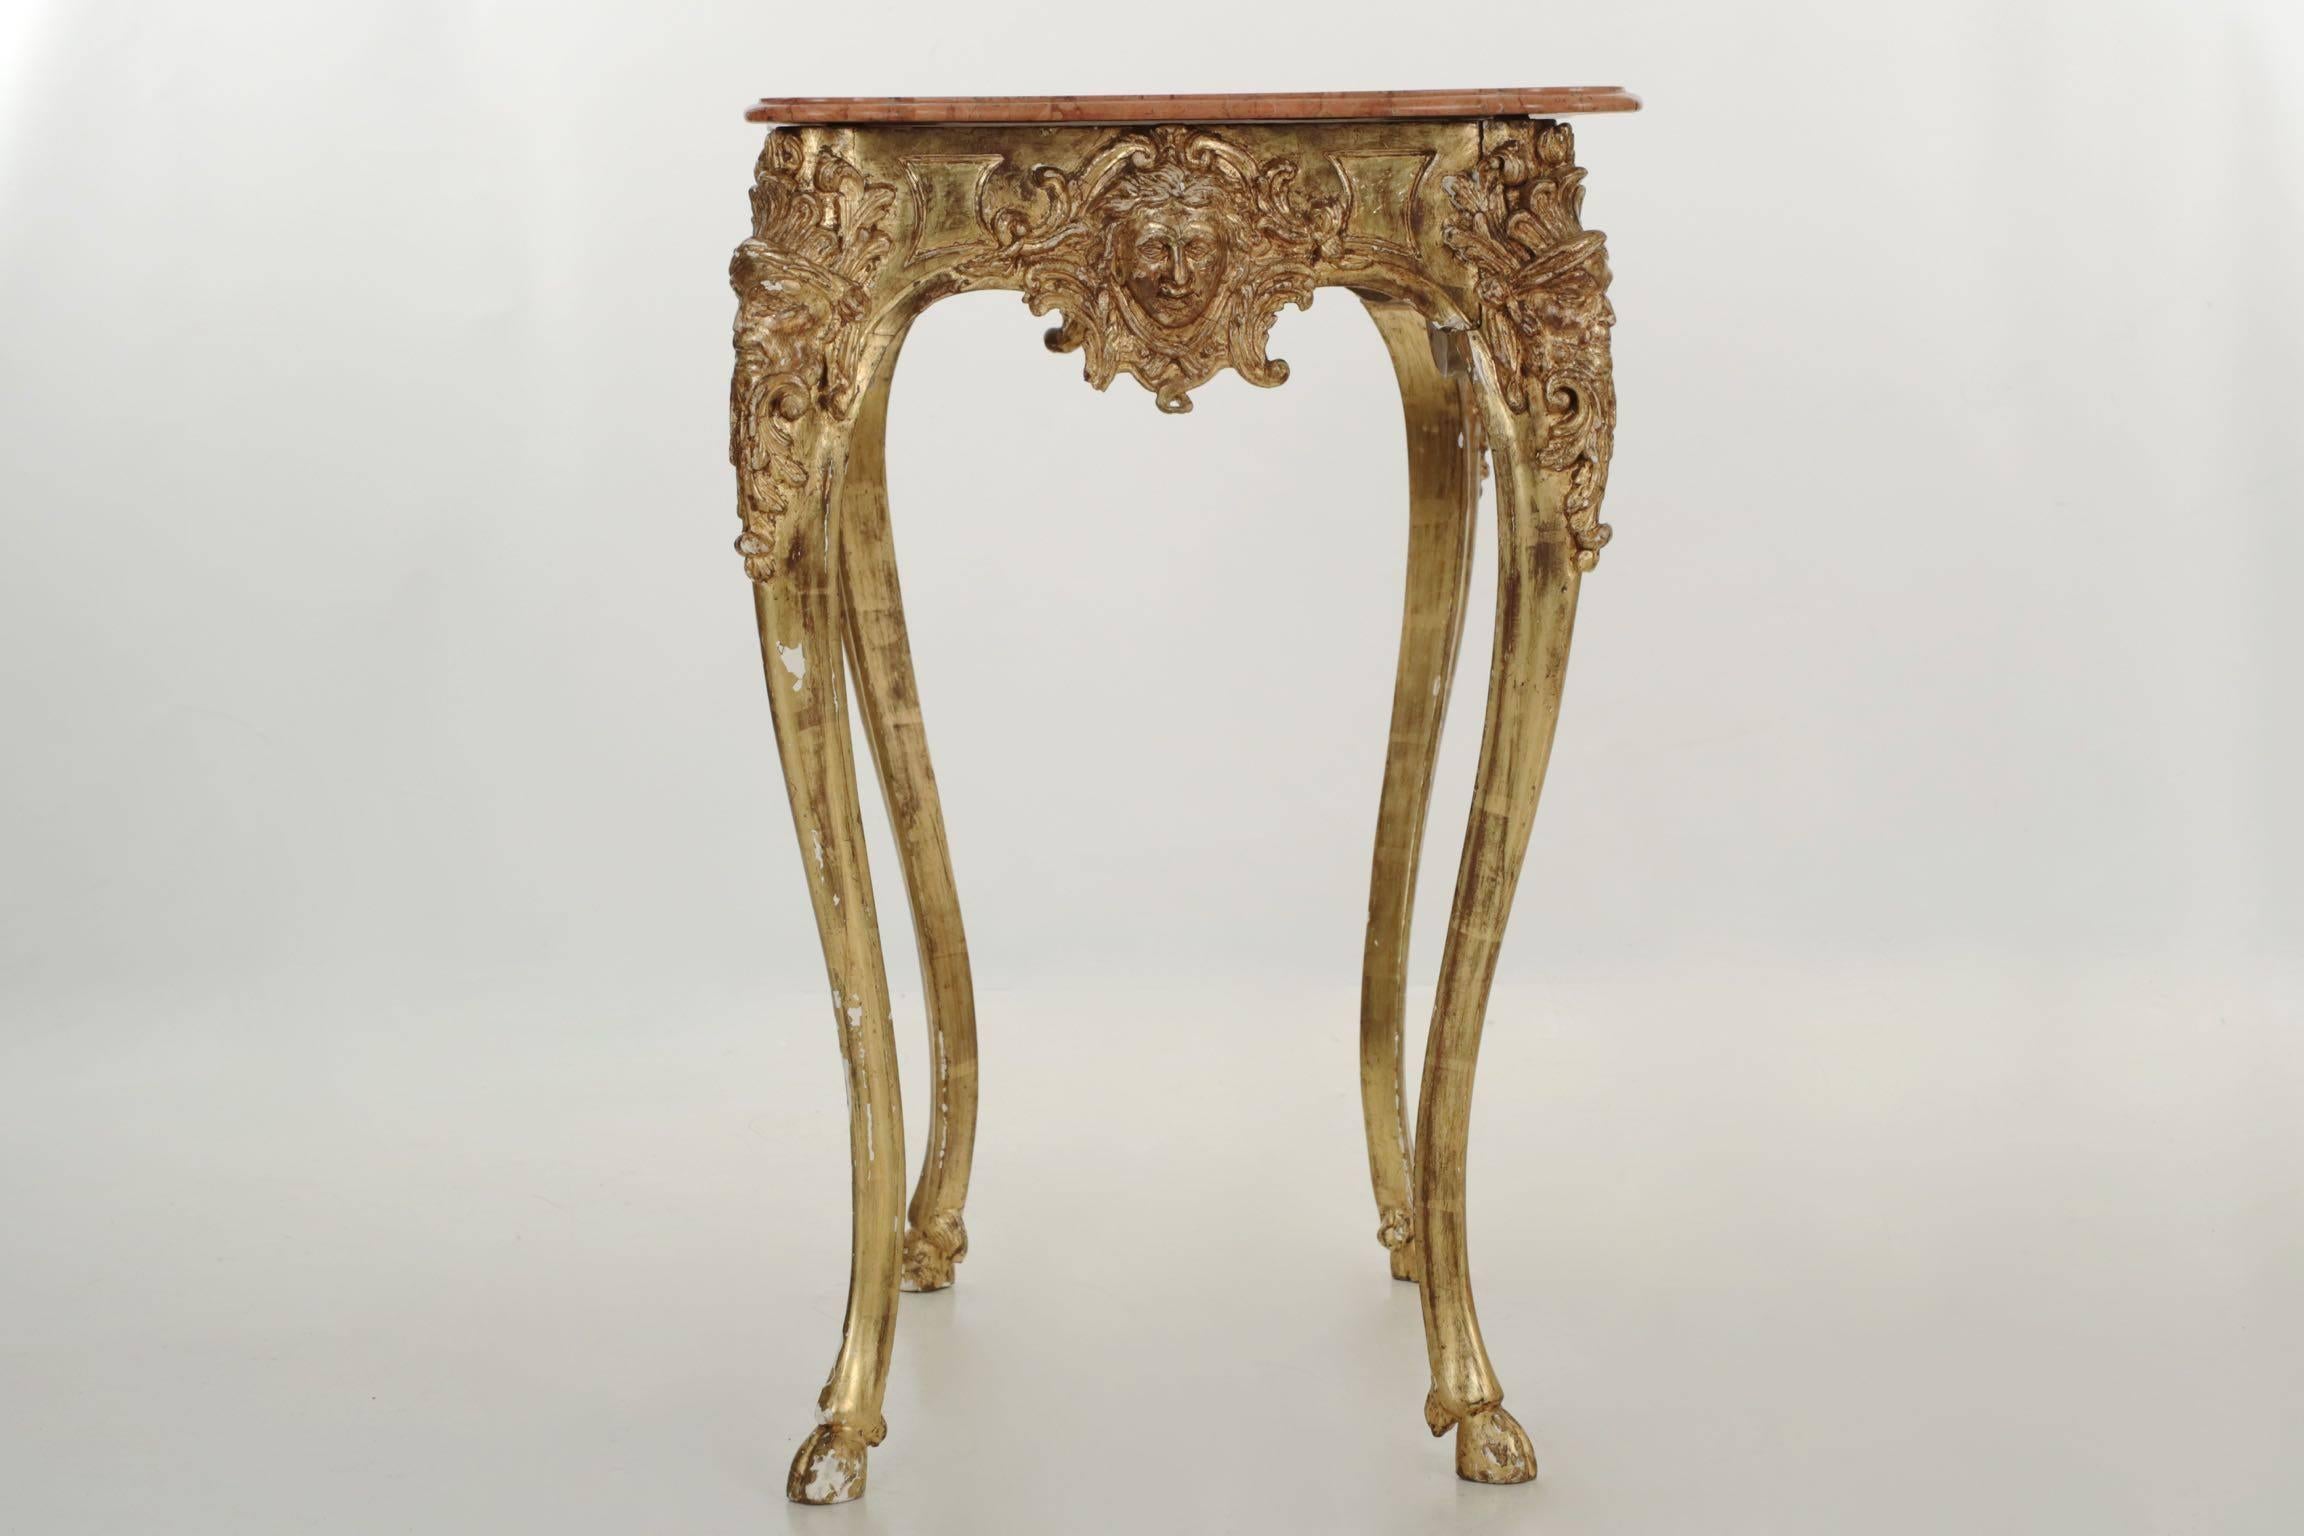 European Continental Rococo Giltwood and Marble Side Table with Hooved Sabots